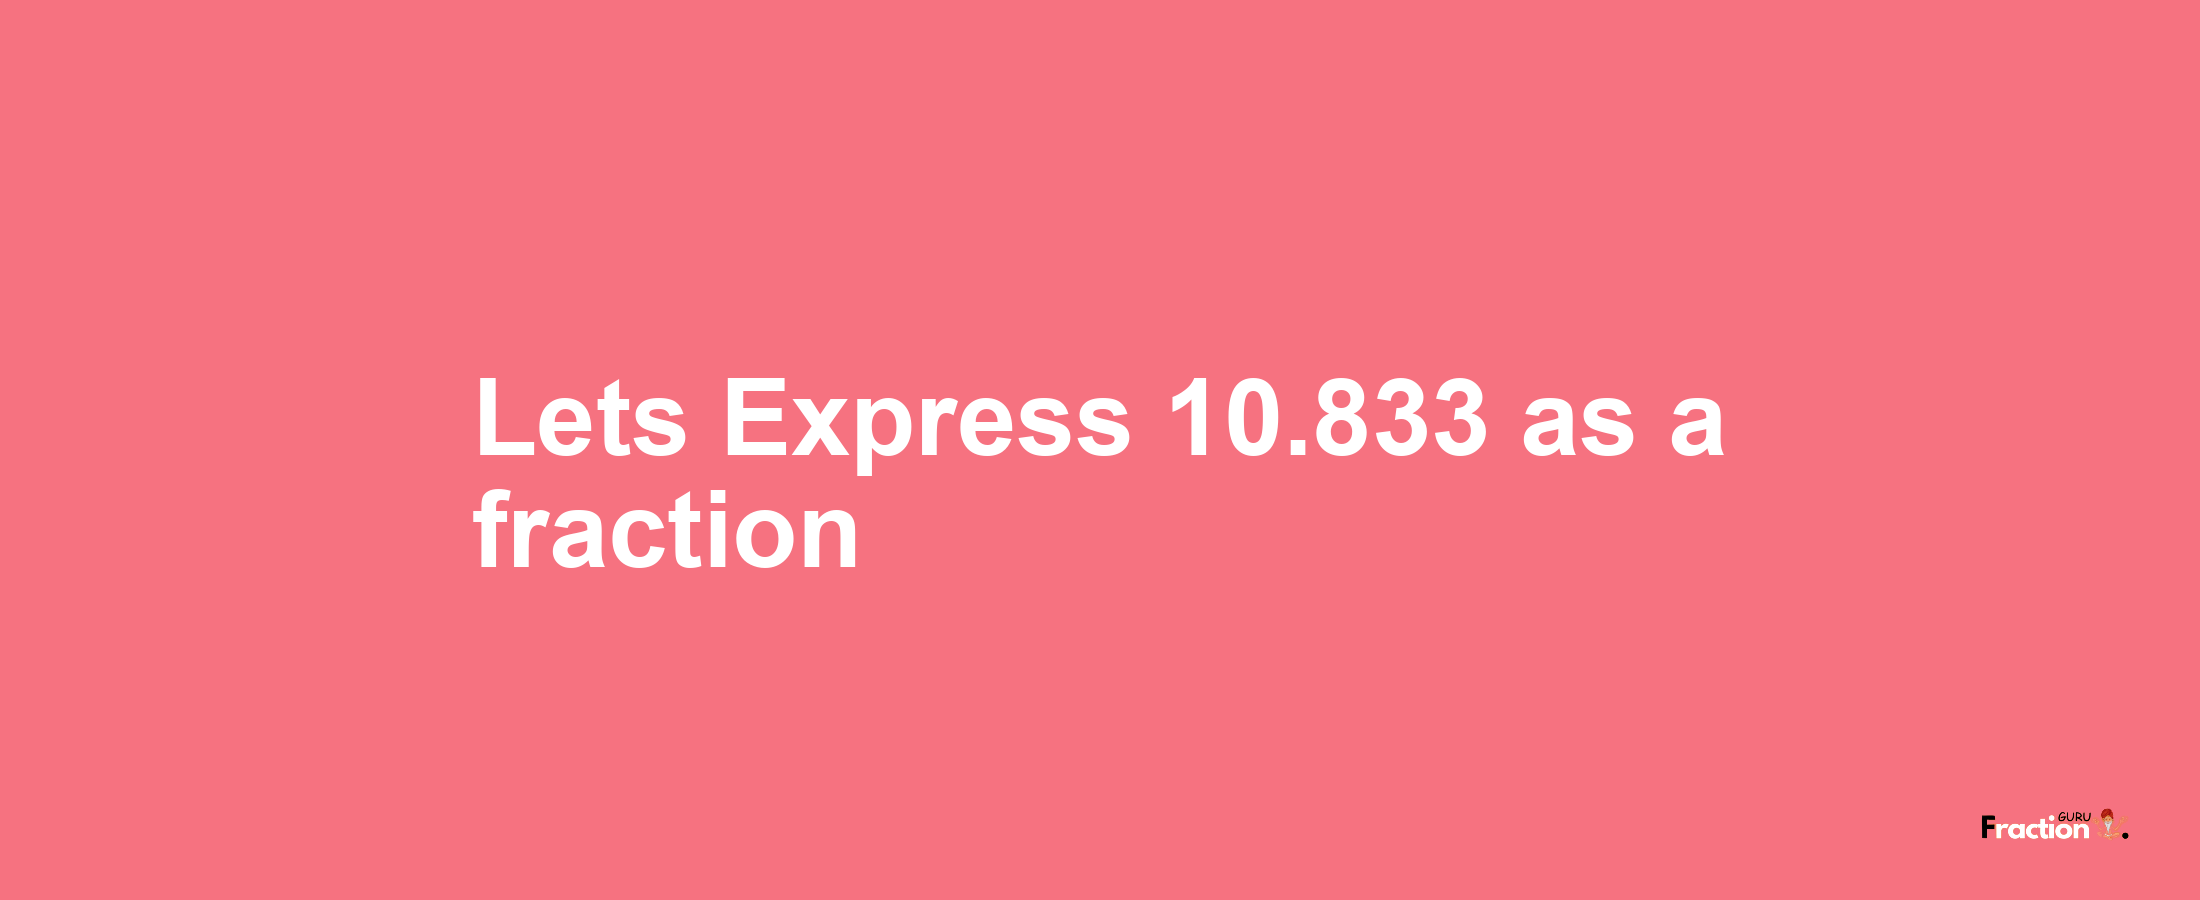 Lets Express 10.833 as afraction